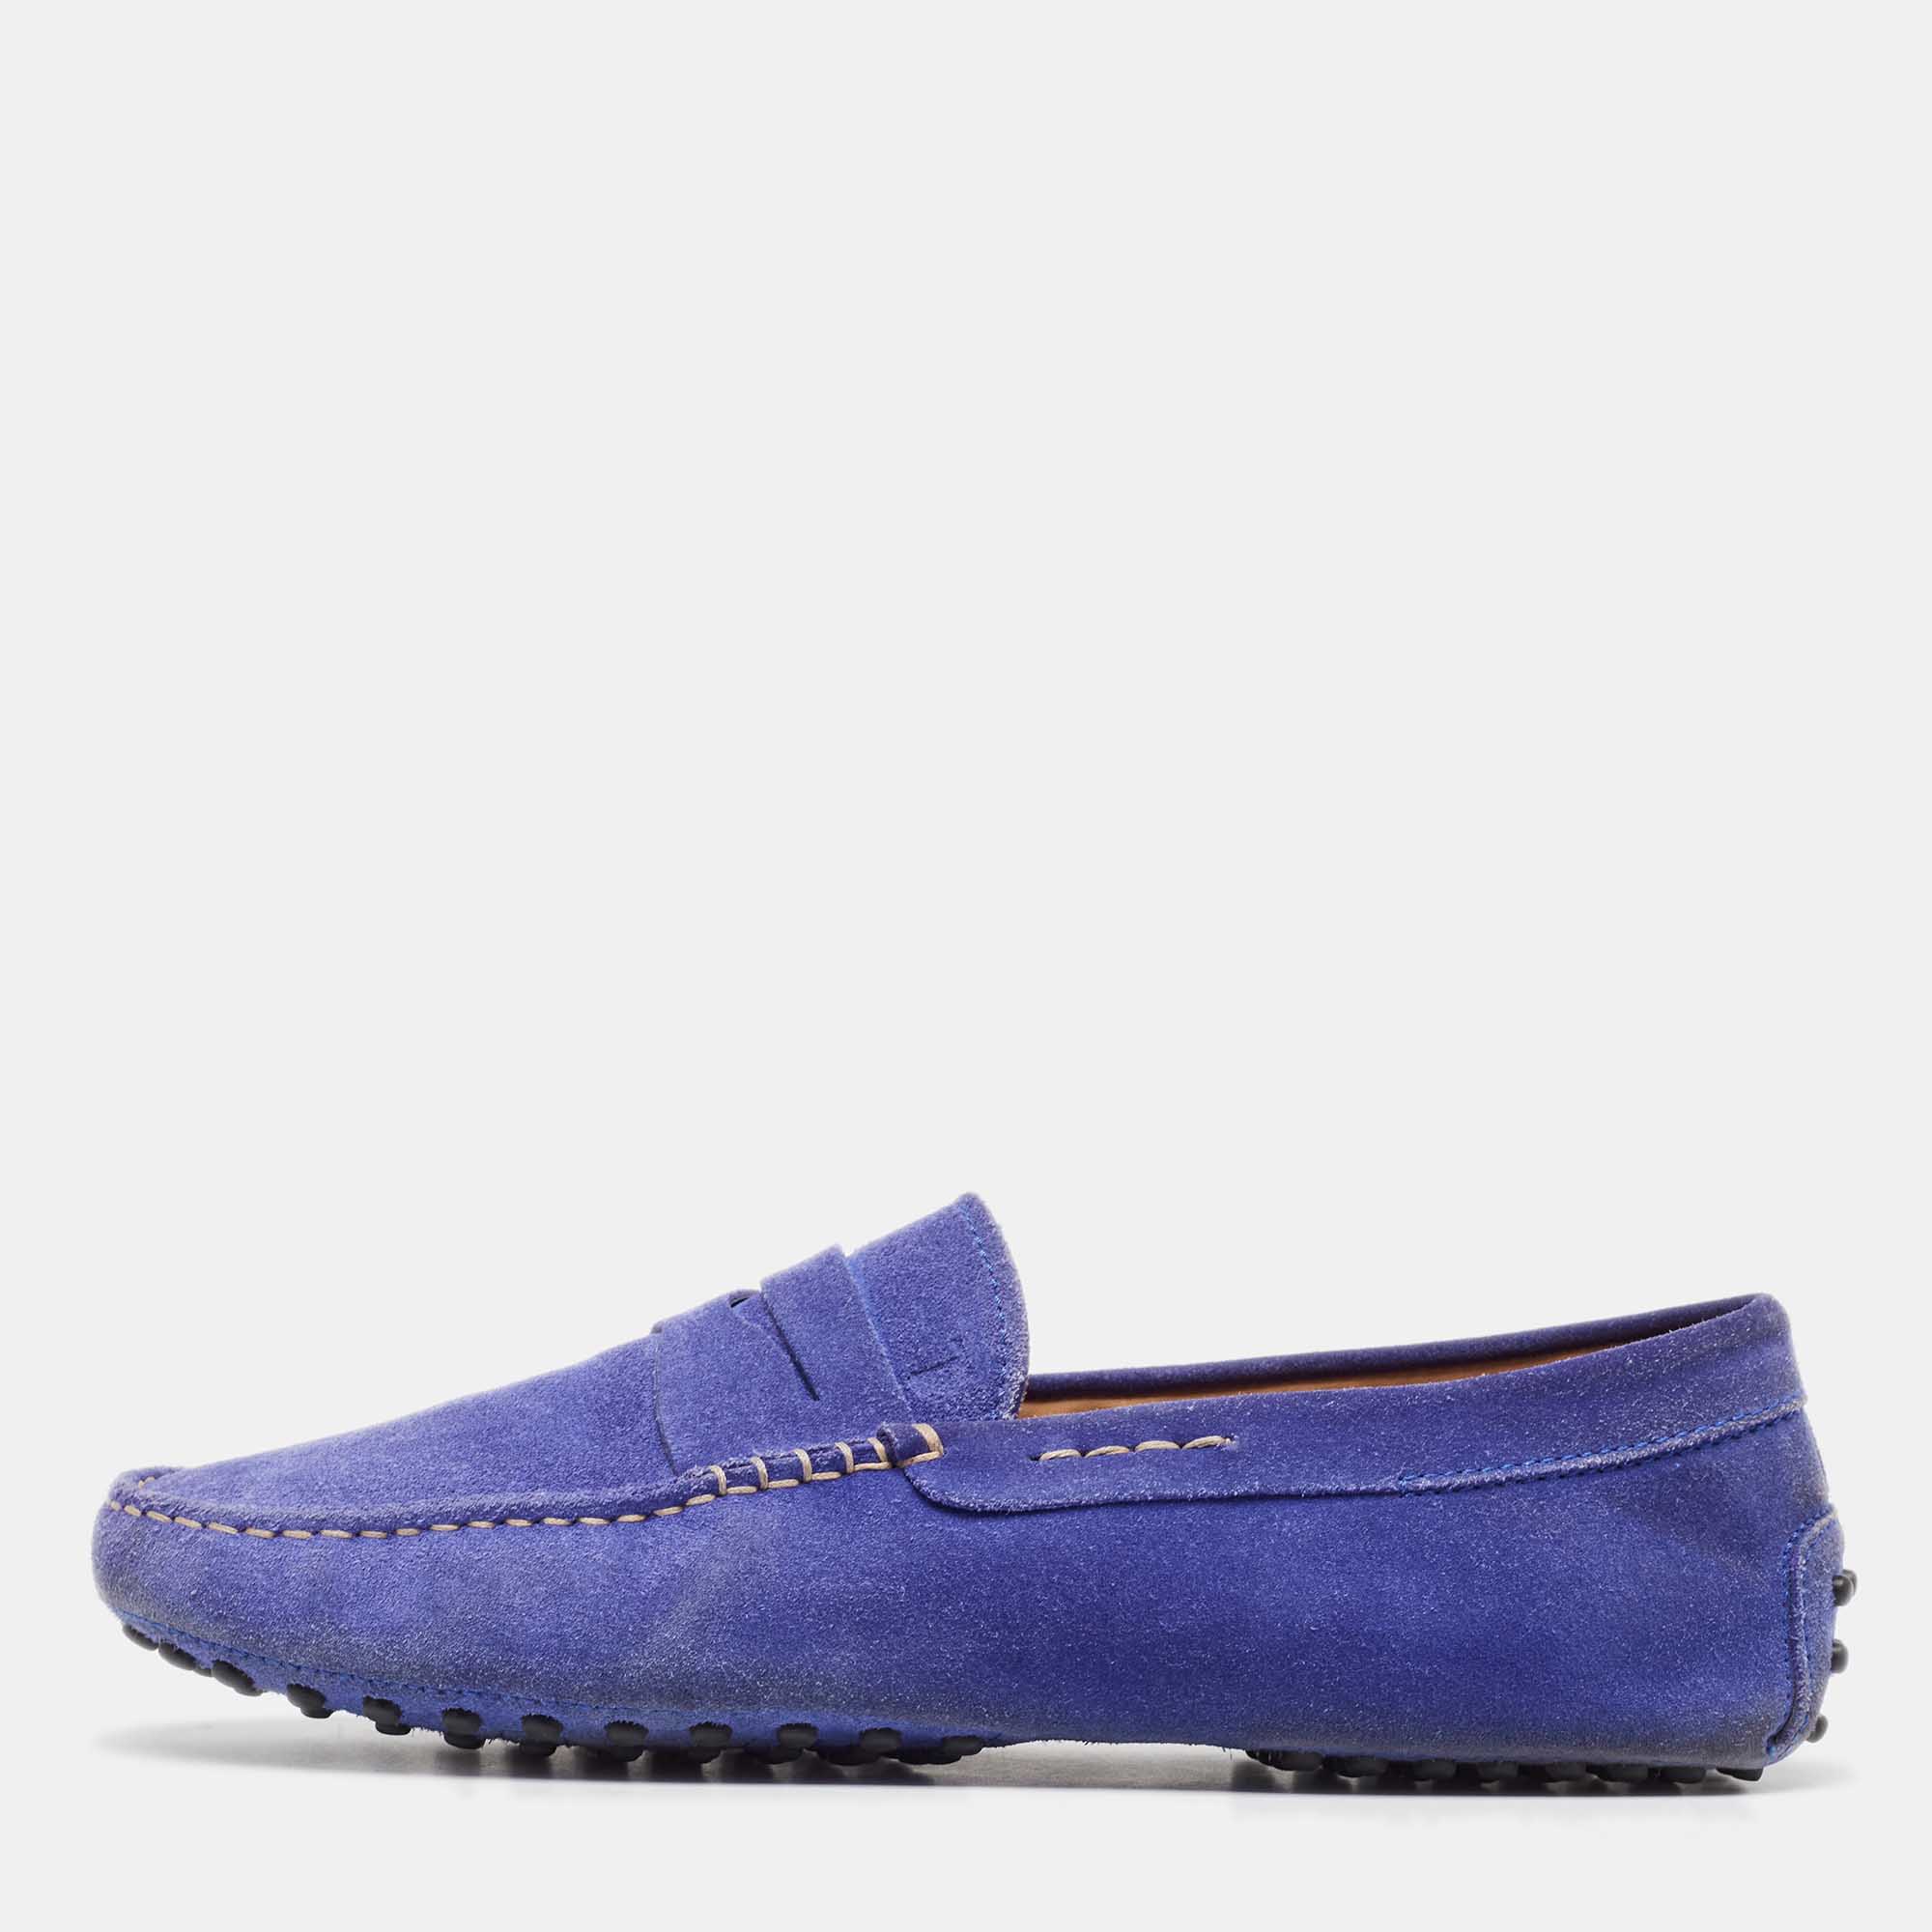 Tod's cobalt blue suede penny loafers size 41.5